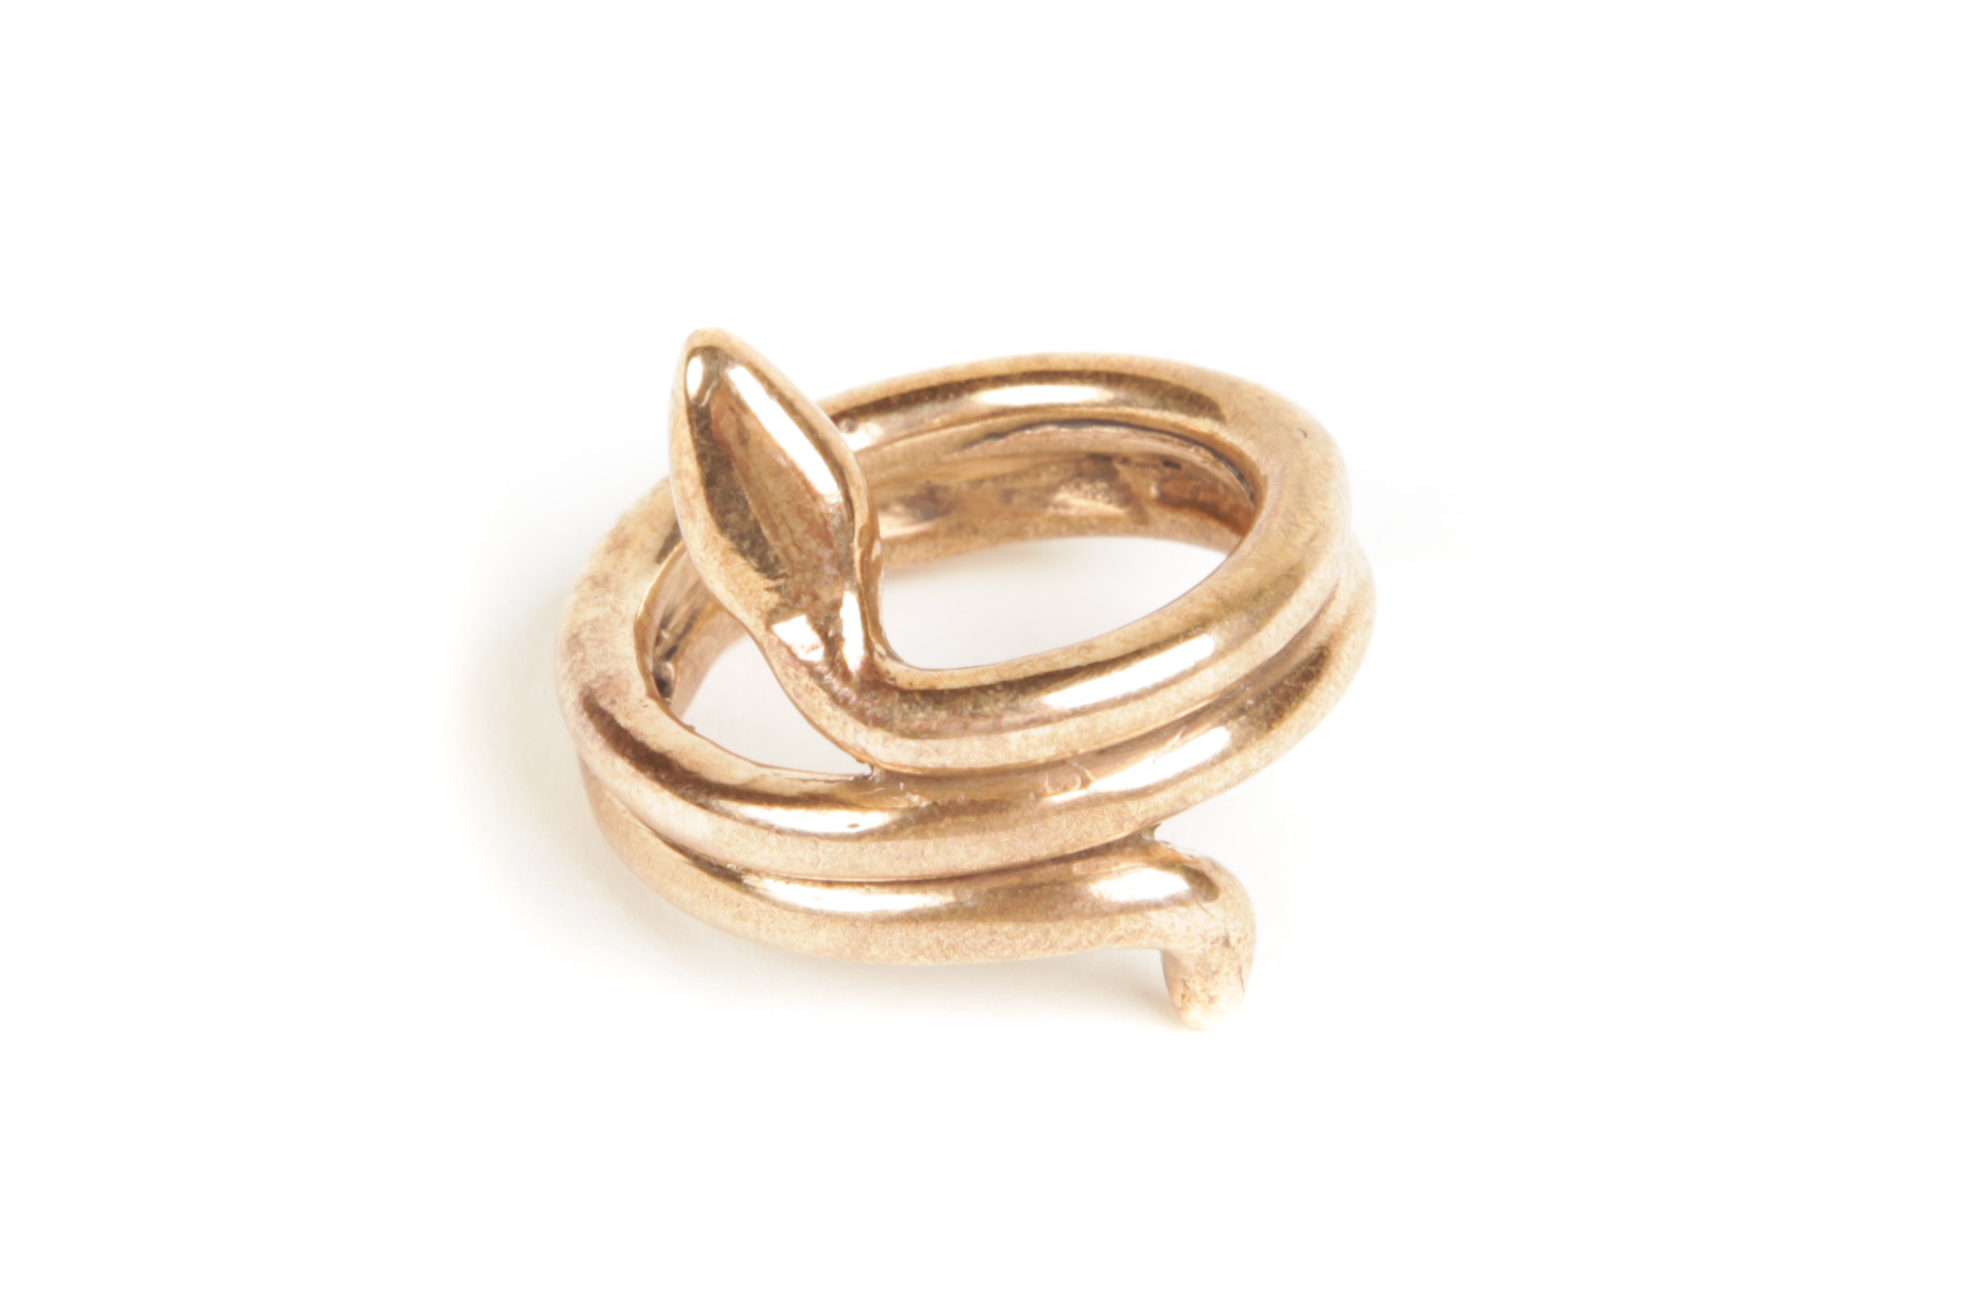 Alexes Bowyer Serpent Ring — James Rowland Shop